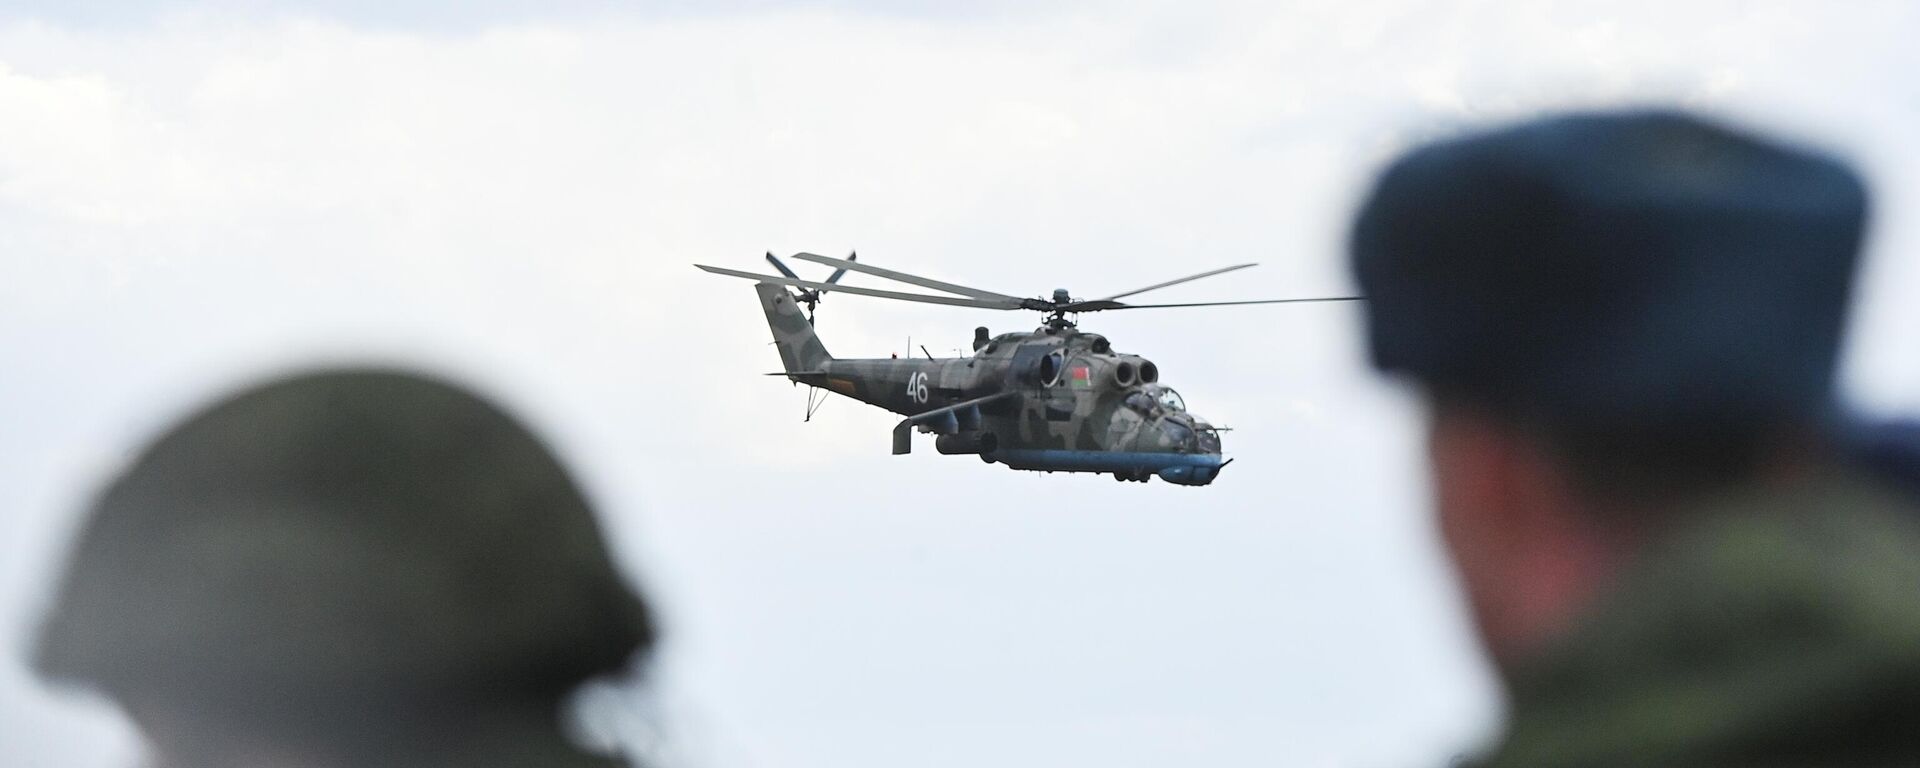 Mi-24 military helicopter takes part in the joint military drills between Belarus and Russia at the training ground in Belarus. - Sputnik International, 1920, 06.04.2023